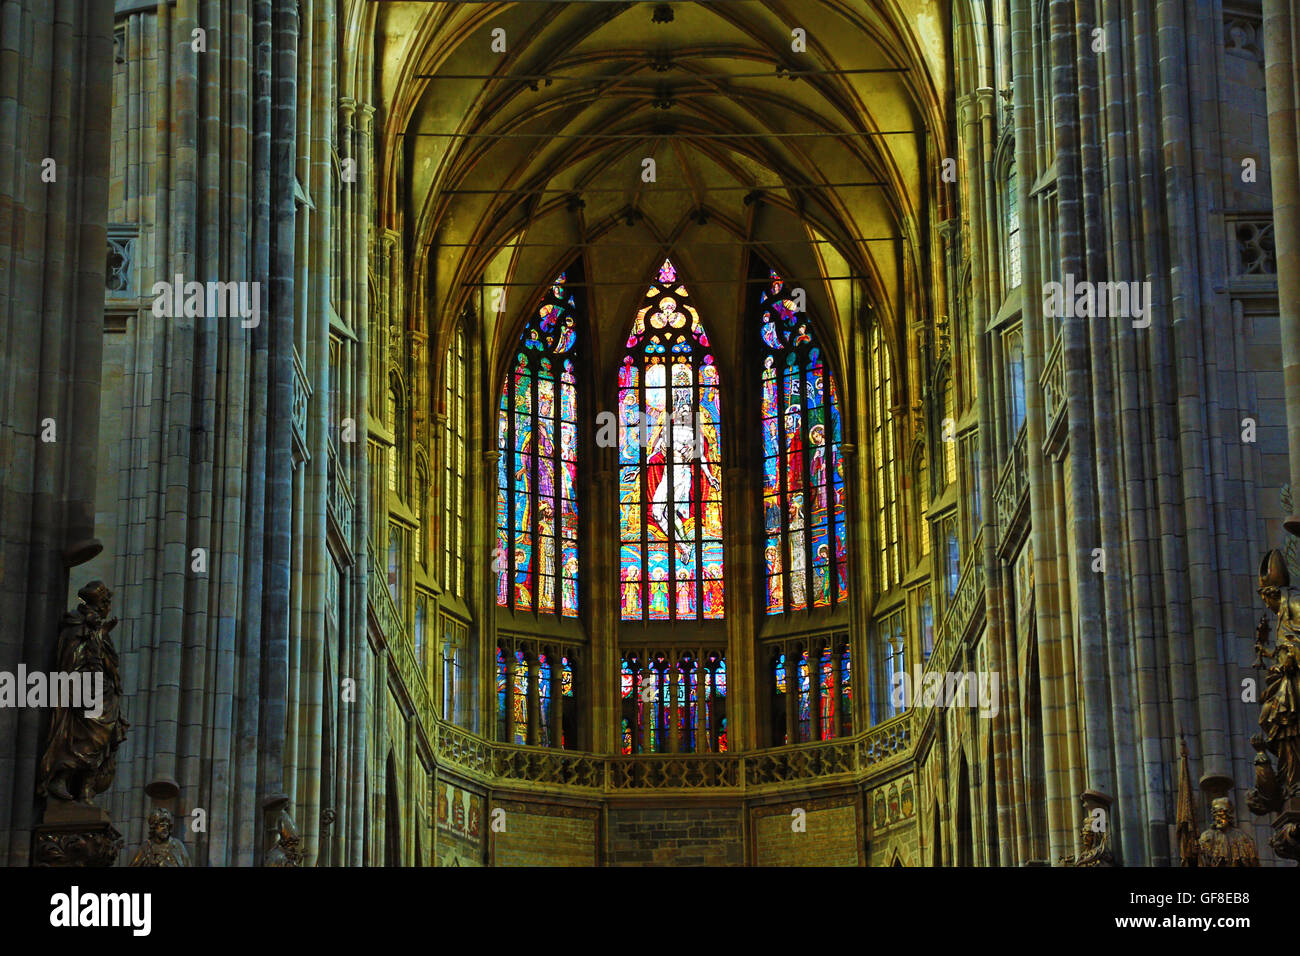 Stained glass windows and vaulted ceiling of the nave of St. Vitus Cathedral, Prague Castle Complex, Prague, Czech Republic Stock Photo